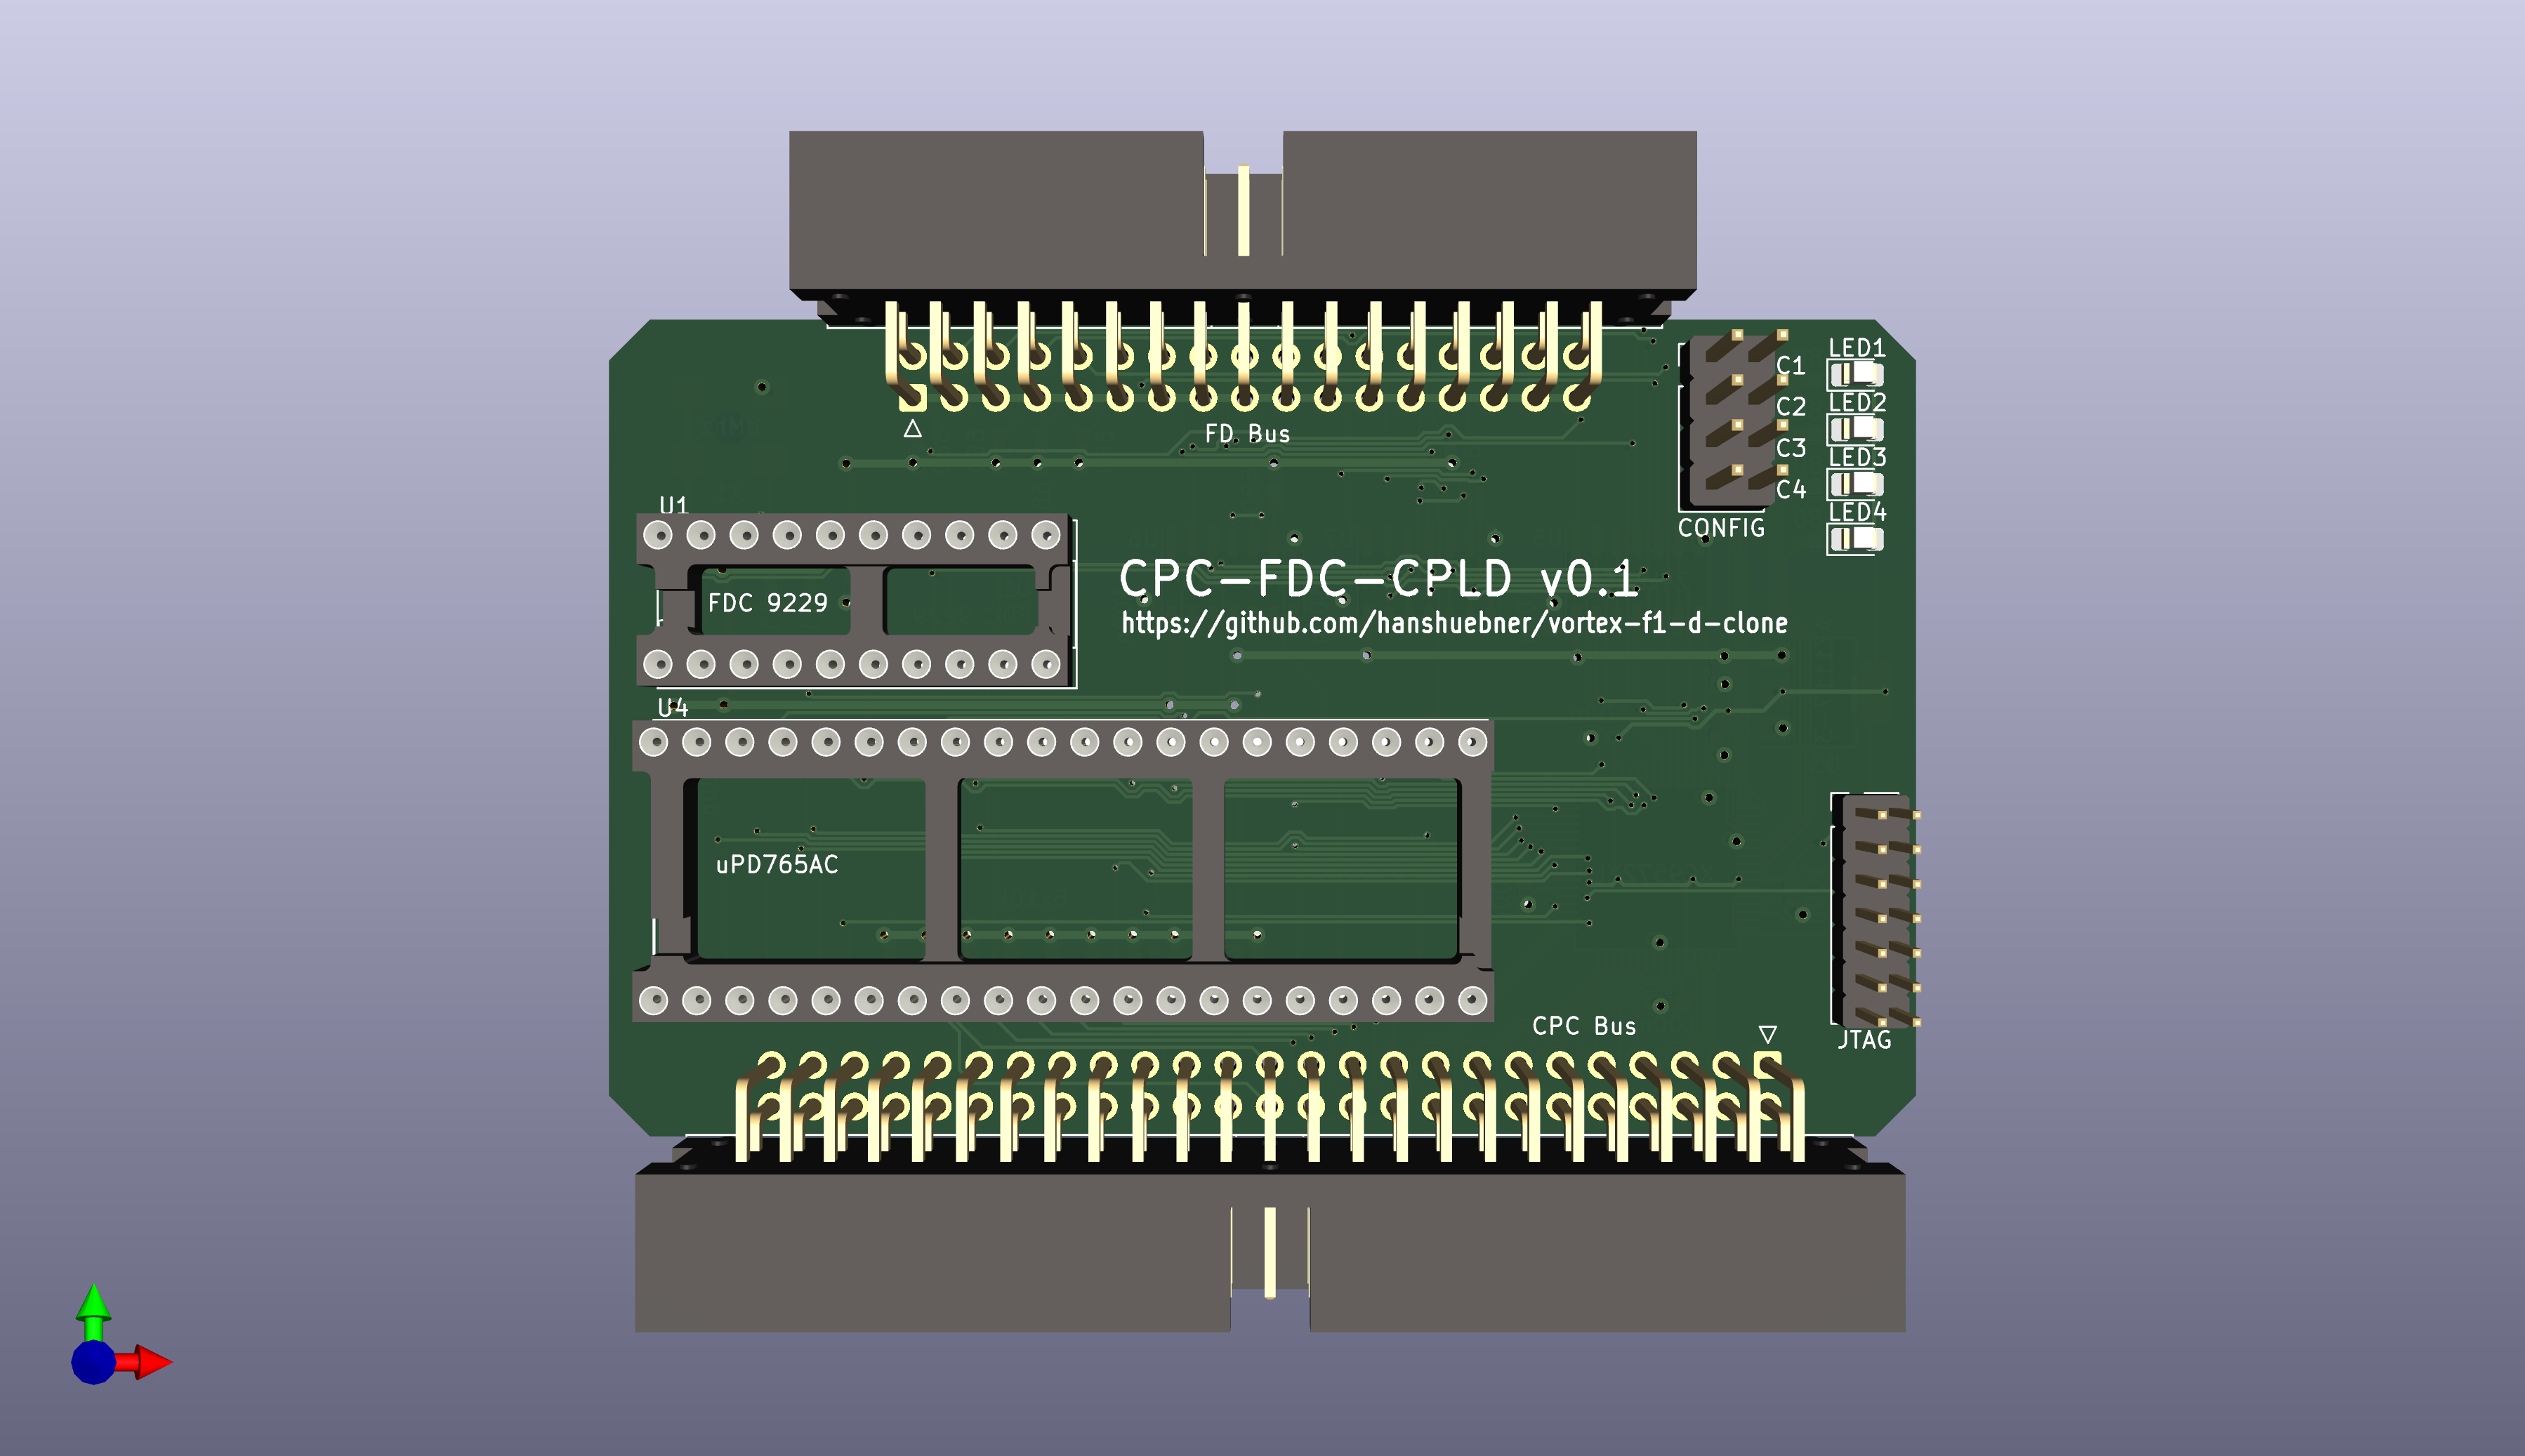 rendered picture of the no-rom-cpld variant (front)